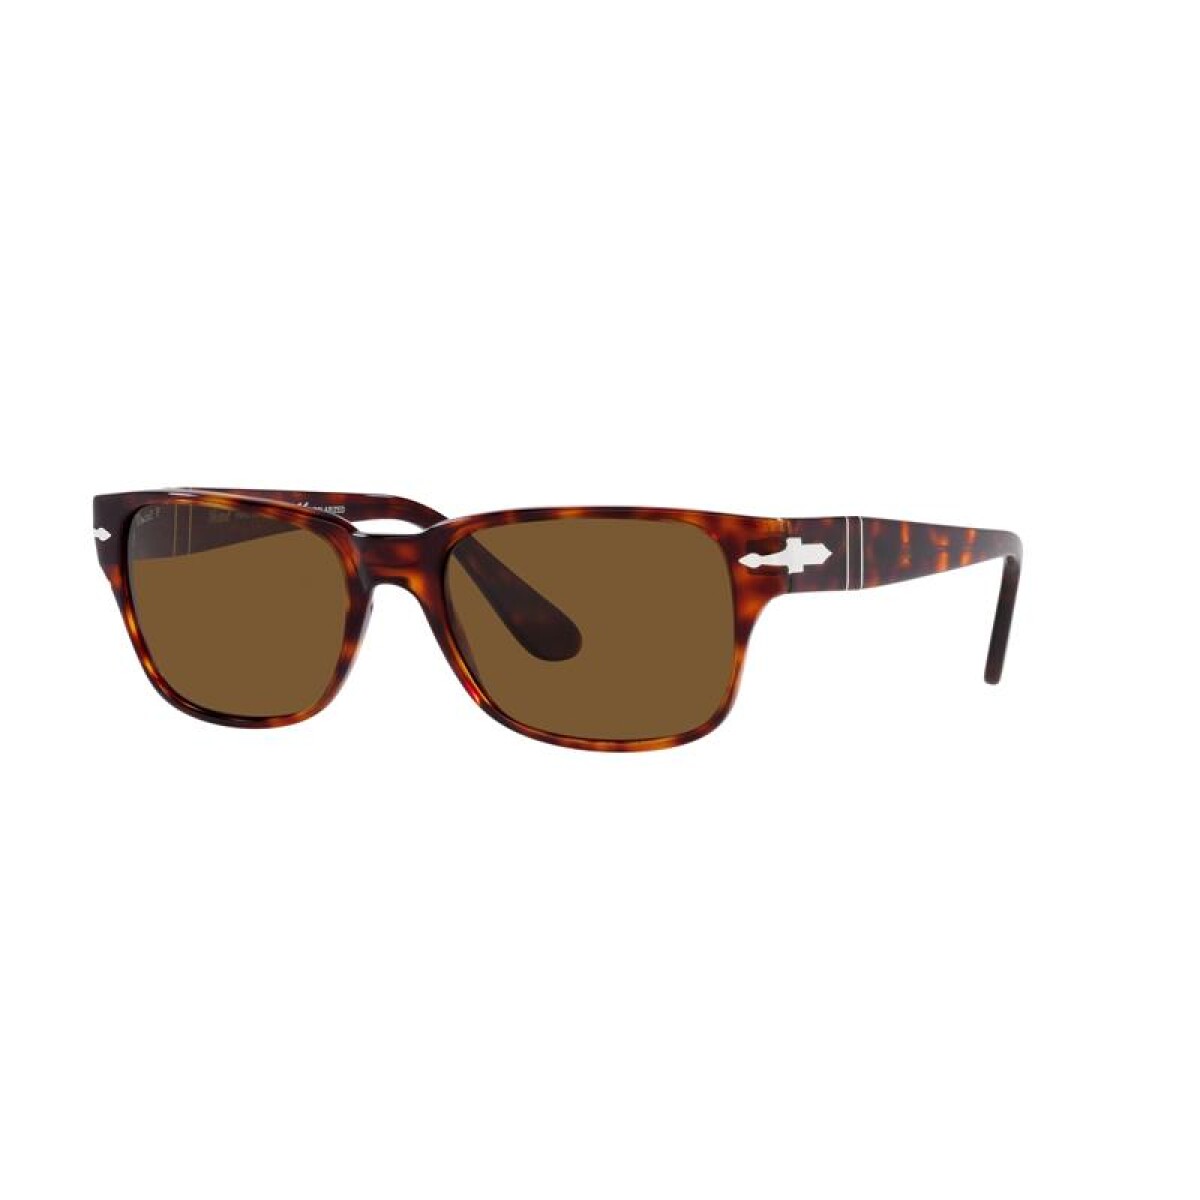 Persol 3288-s - 24/57 